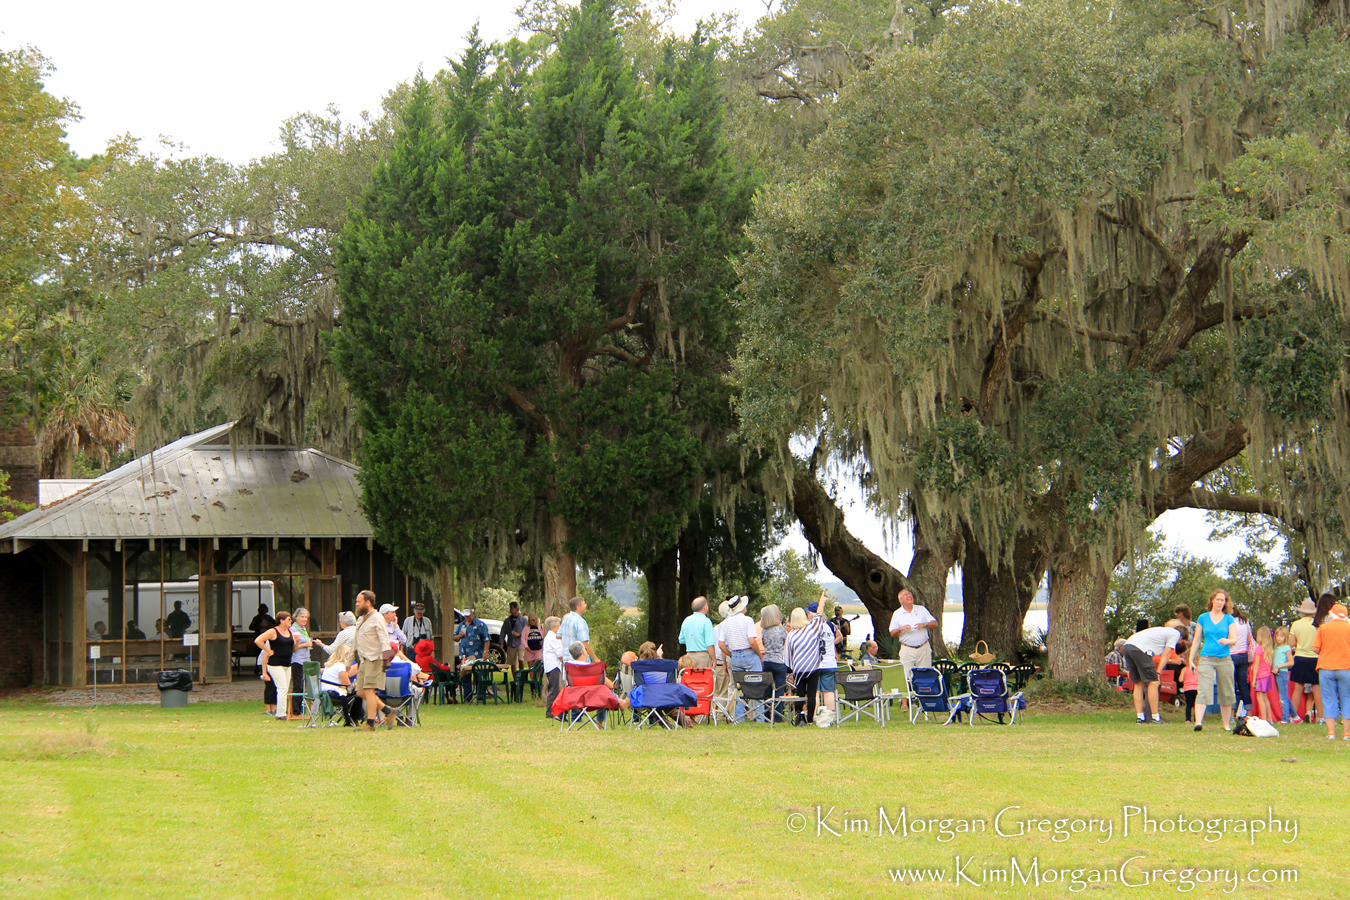 2016 Annual Family Picnic at the Dill Sanctuary